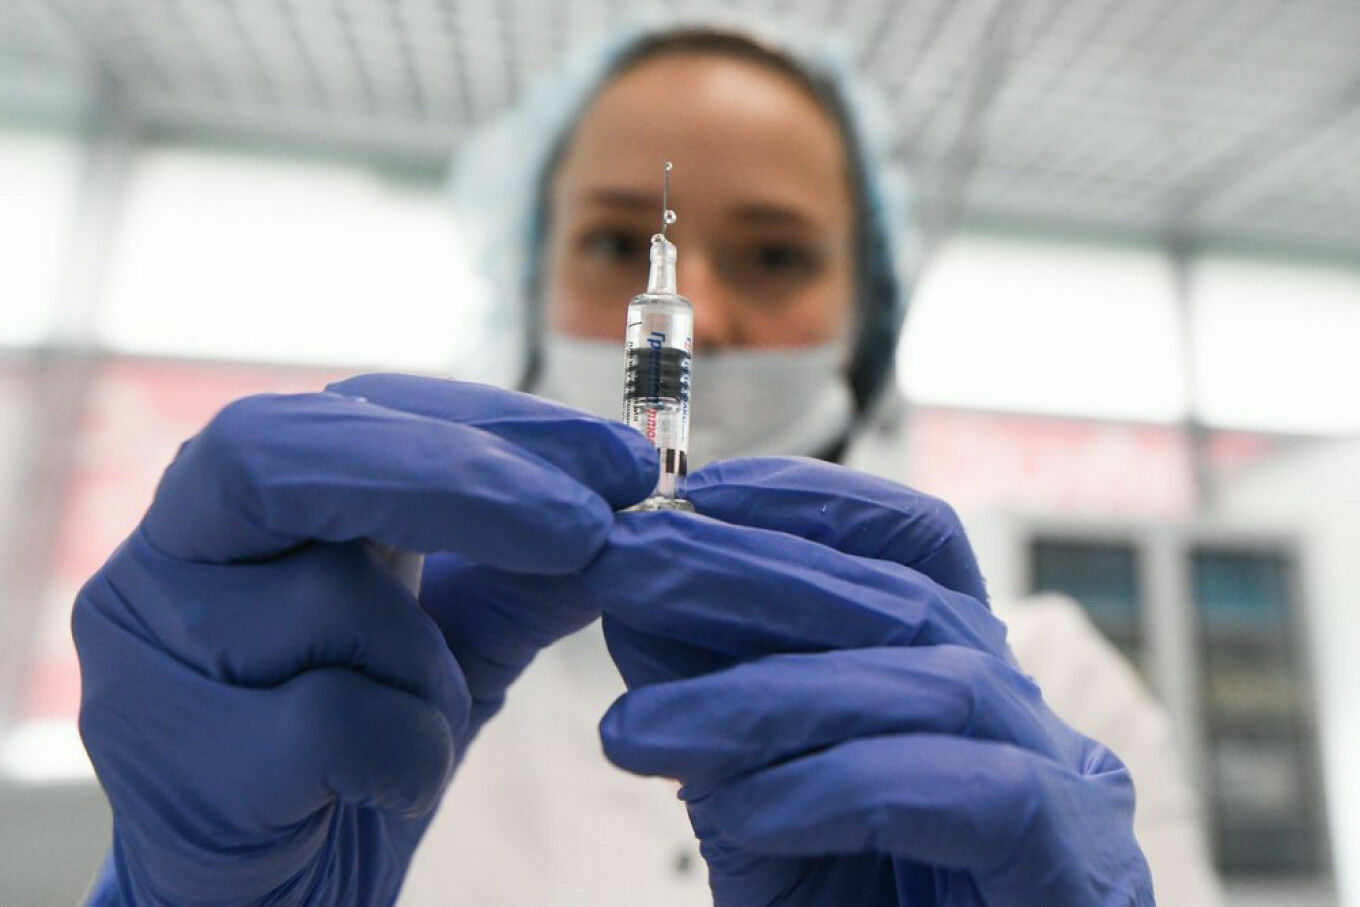 WHO: the vaccination against coronavirus will start no earlier than 2021